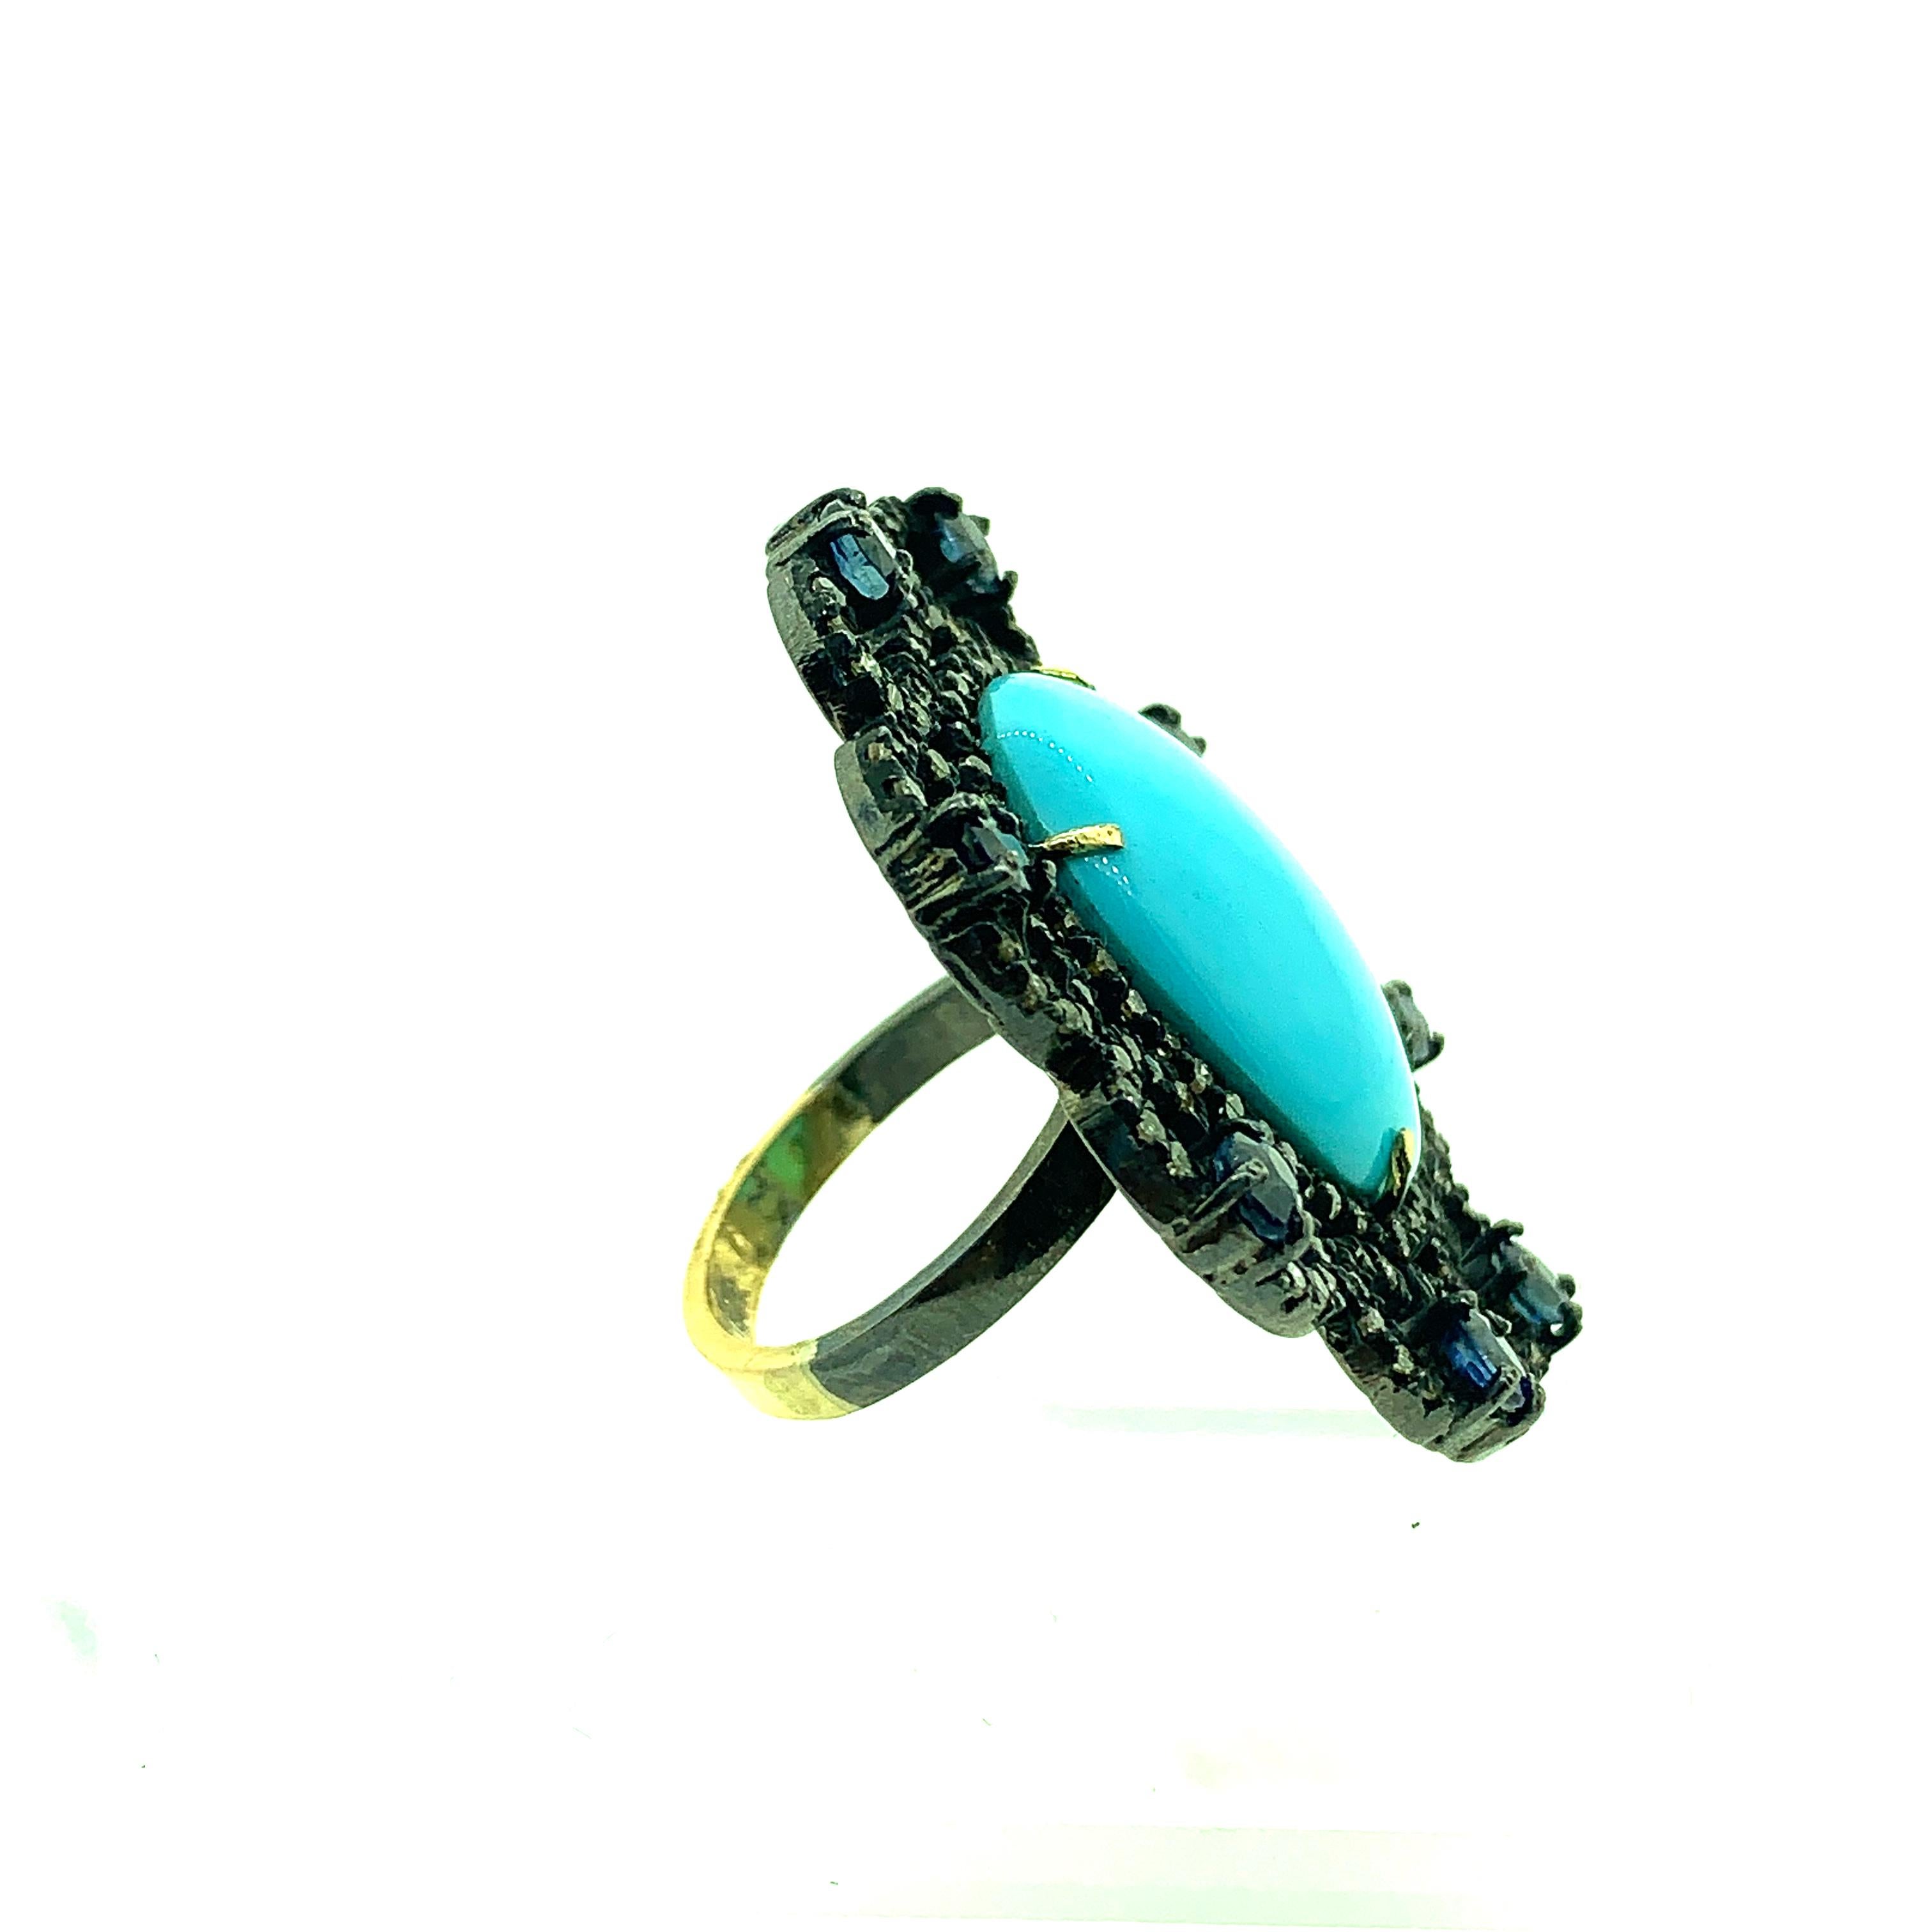 15.86 ct Turquoise , 2.17 ct Sapphire and 1.77 ct  Pave Champagne Diamond Ring set in Oxidized Sterling Silver with half ring shank in 14KT Gold. The turquoise is natural and real stone set by four 14Kt Gold Prongs. The sapphire stone in ring are